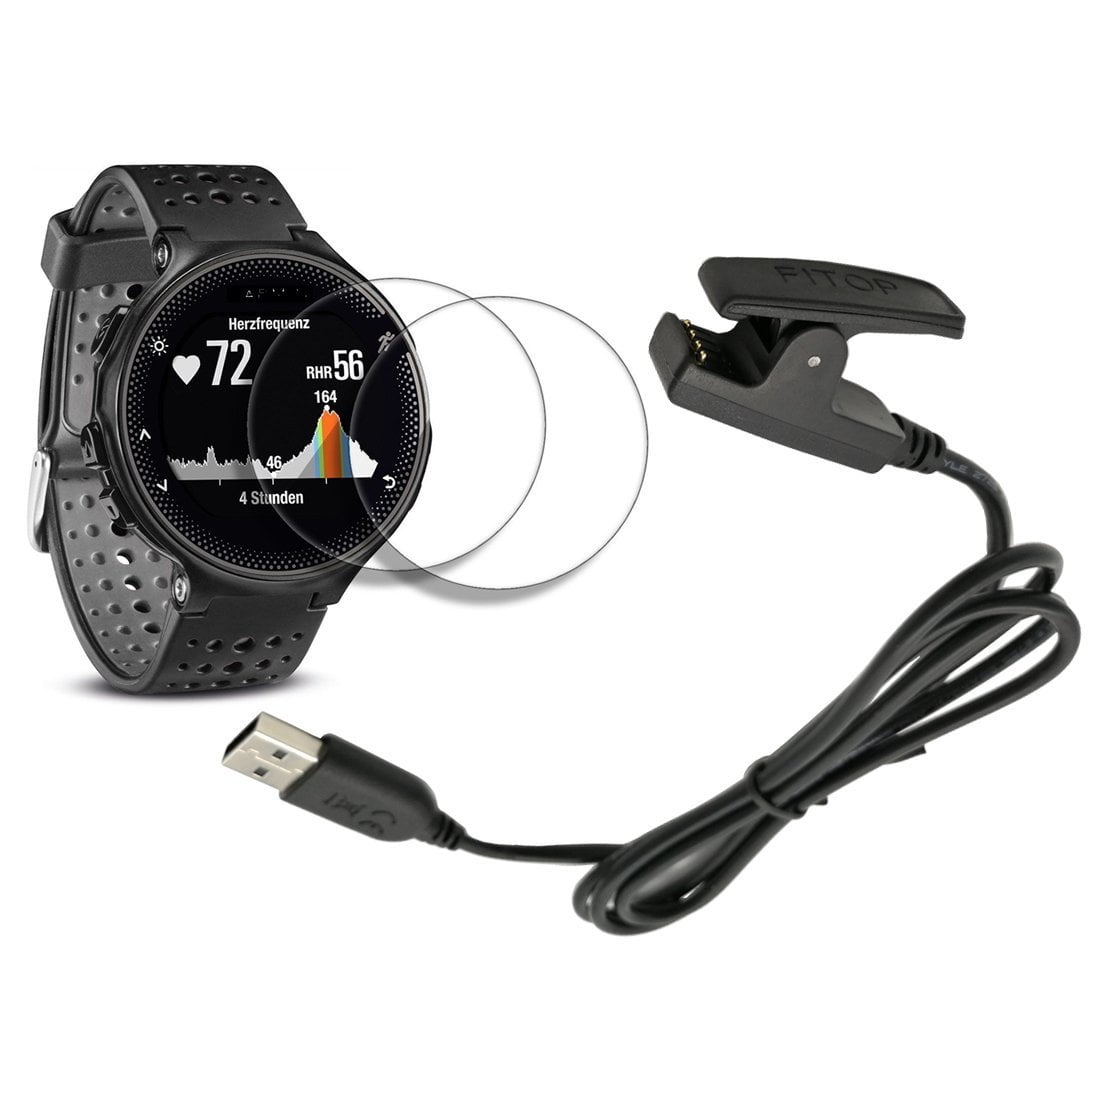 TUSITA Charger Compatible with Garmin Forerunner 920XT Smartwatch - USB  Charging Cable Clip Cradle 100cm - Fitness Tracker Accessories